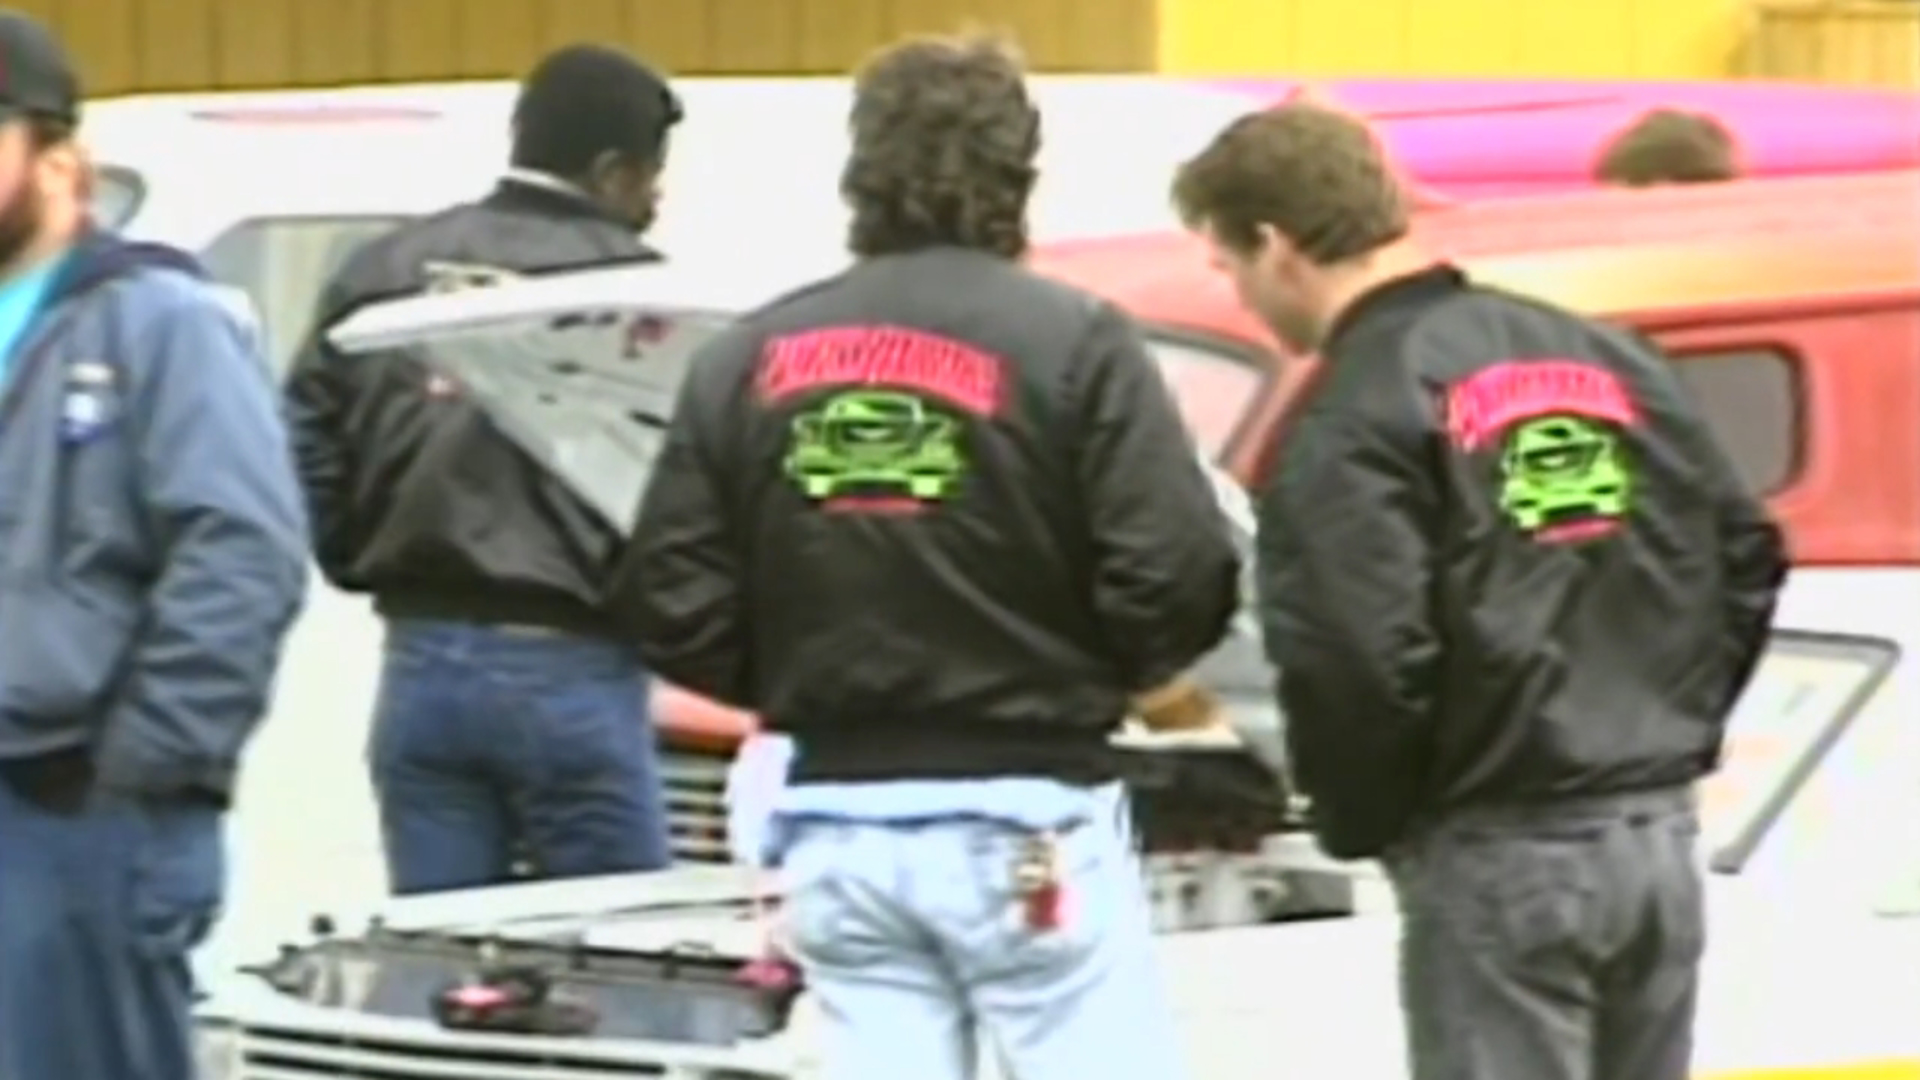 May 12, 1990: Street Machine Motor City Nationals participants came to Monroe County to display collectible cars. WTOL 11's Evan Rosen introduces us to some of them.